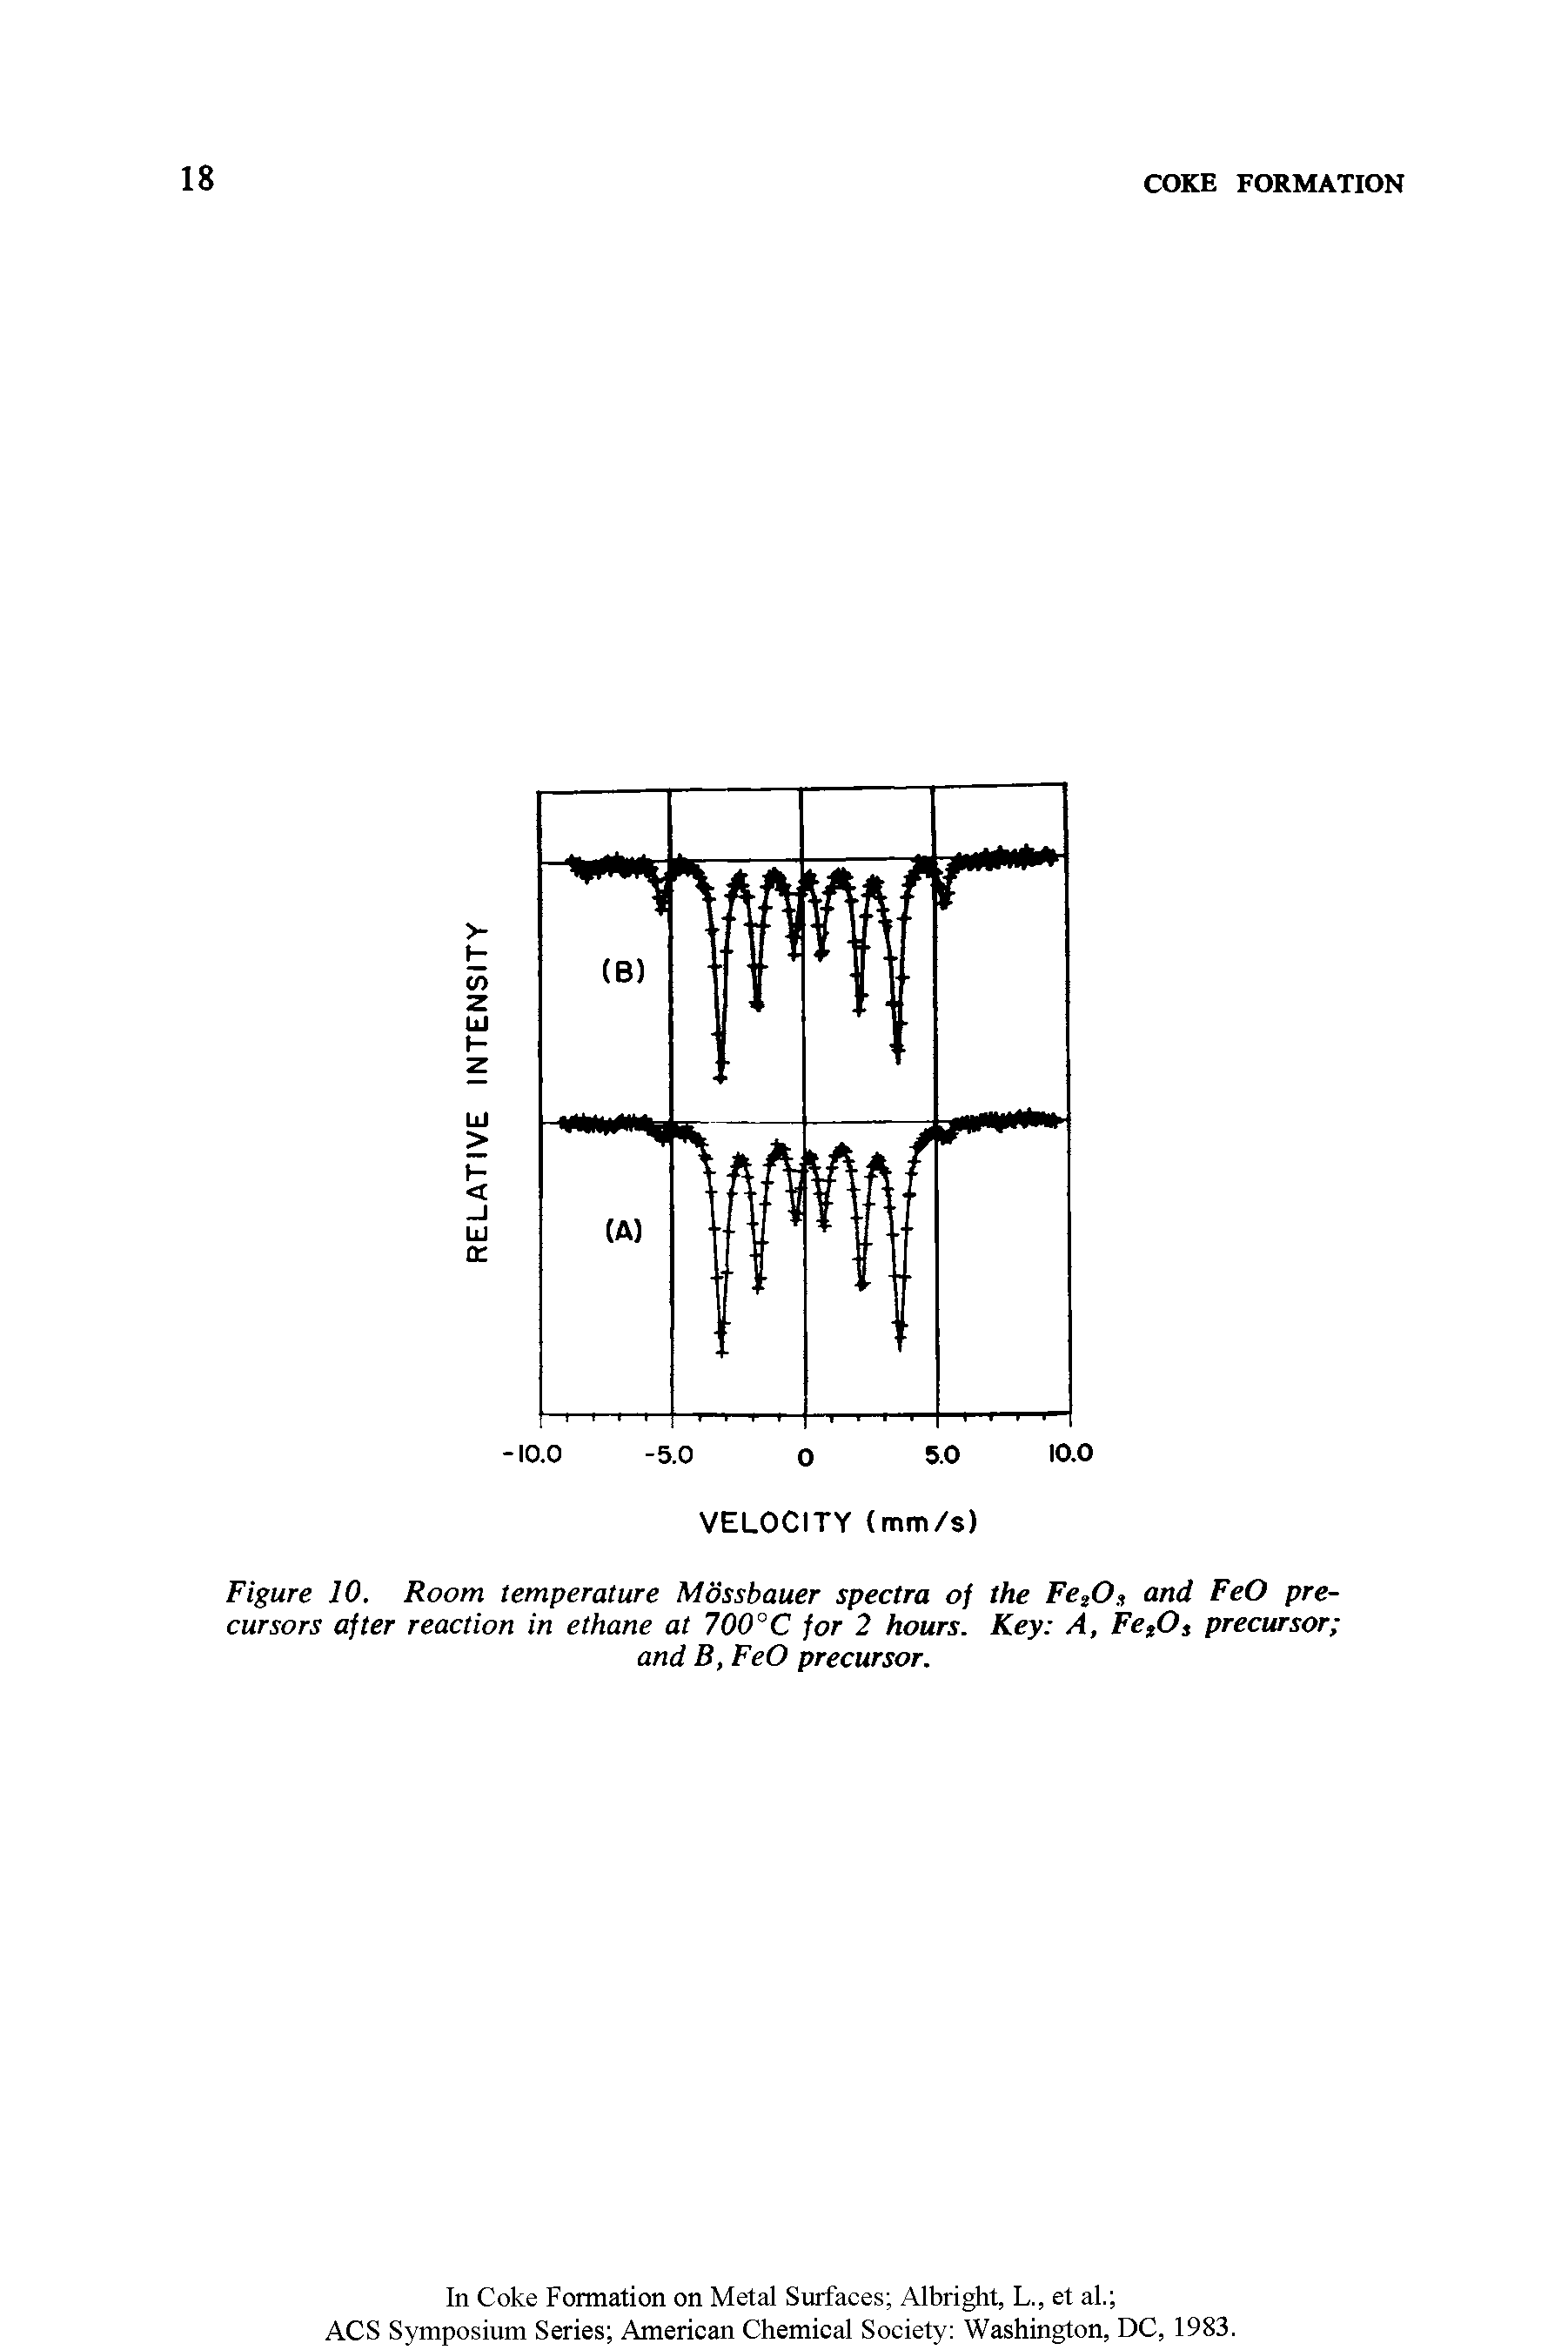 Figure 10. Room temperature Mossbauer spectra of the Fe.fi, and FeO precursors after reaction in ethane at 700°C for 2 hours. Key A, Fefi, precursor ...